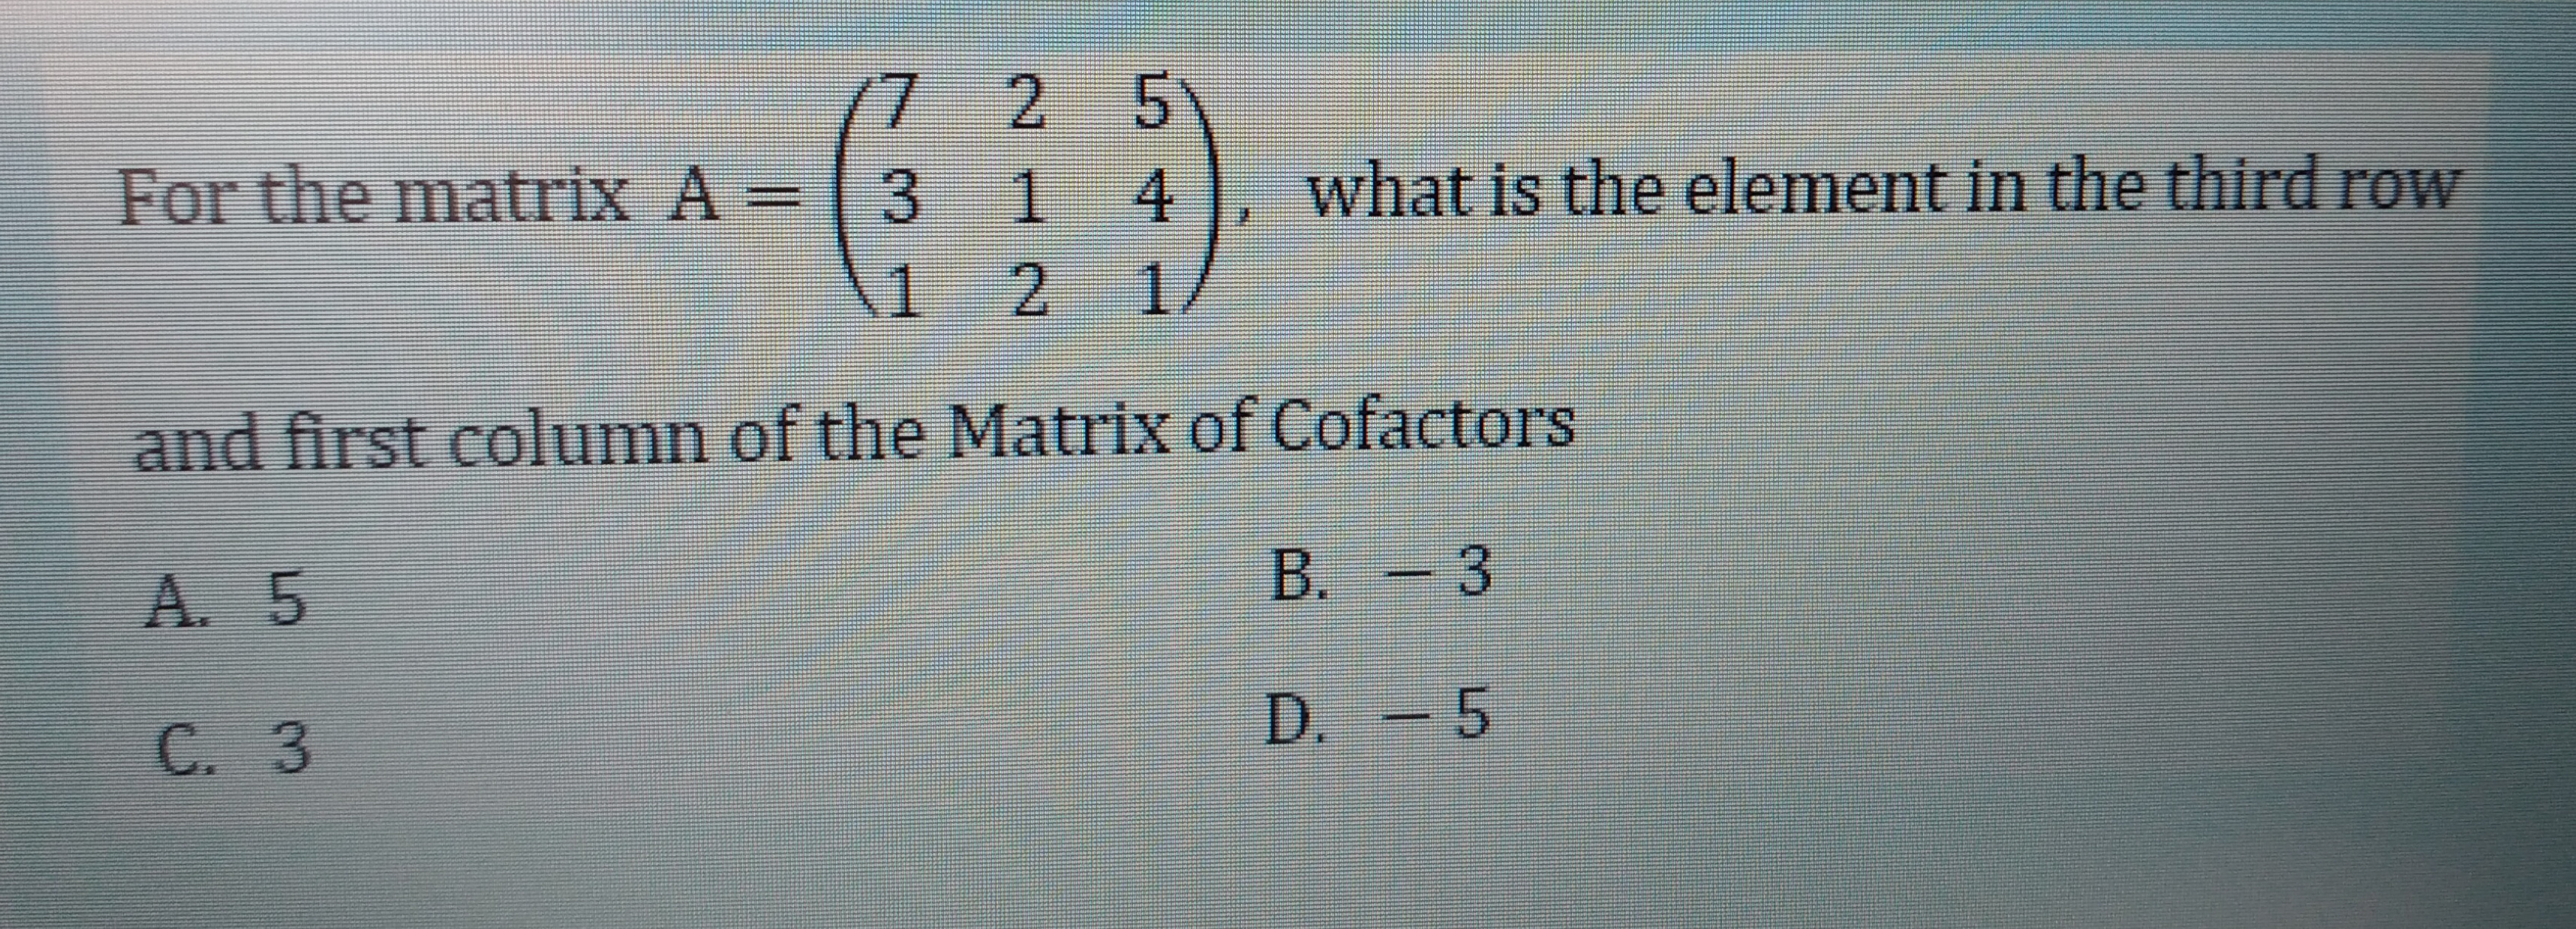 2 5
For the matrix A 3
14
what is the element in the third row
1
2.
1.
and first column of the Matrix of Cofactors
B.
- 3
A. 5
D. - 5
C. 3
